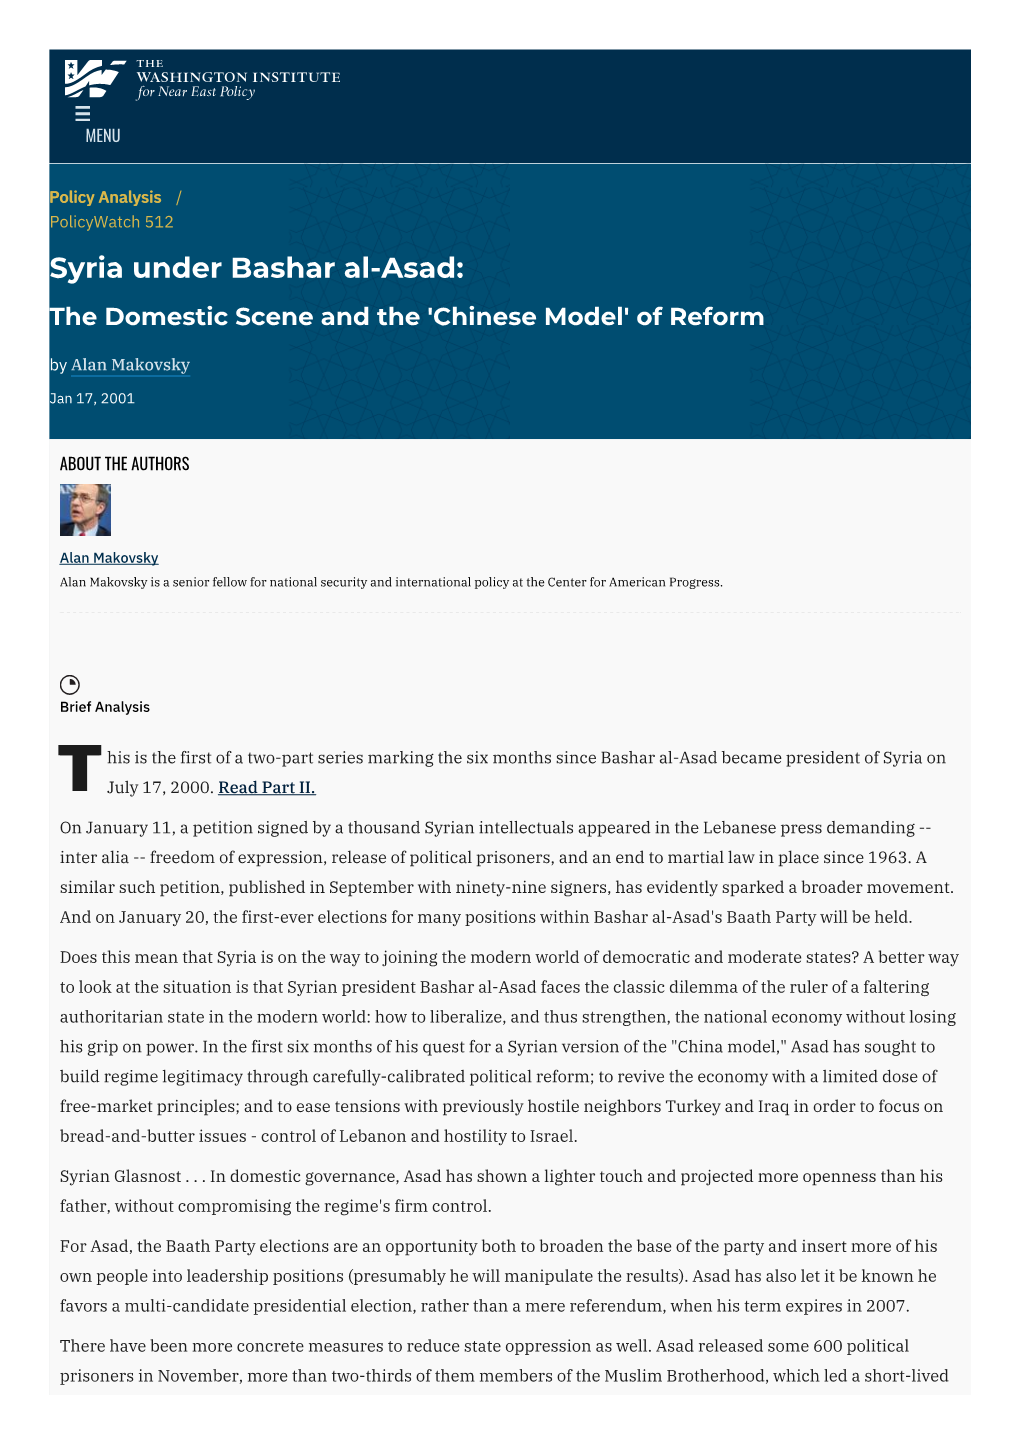 Syria Under Bashar Al-Asad: the Domestic Scene and the 'Chinese Model' of Reform by Alan Makovsky